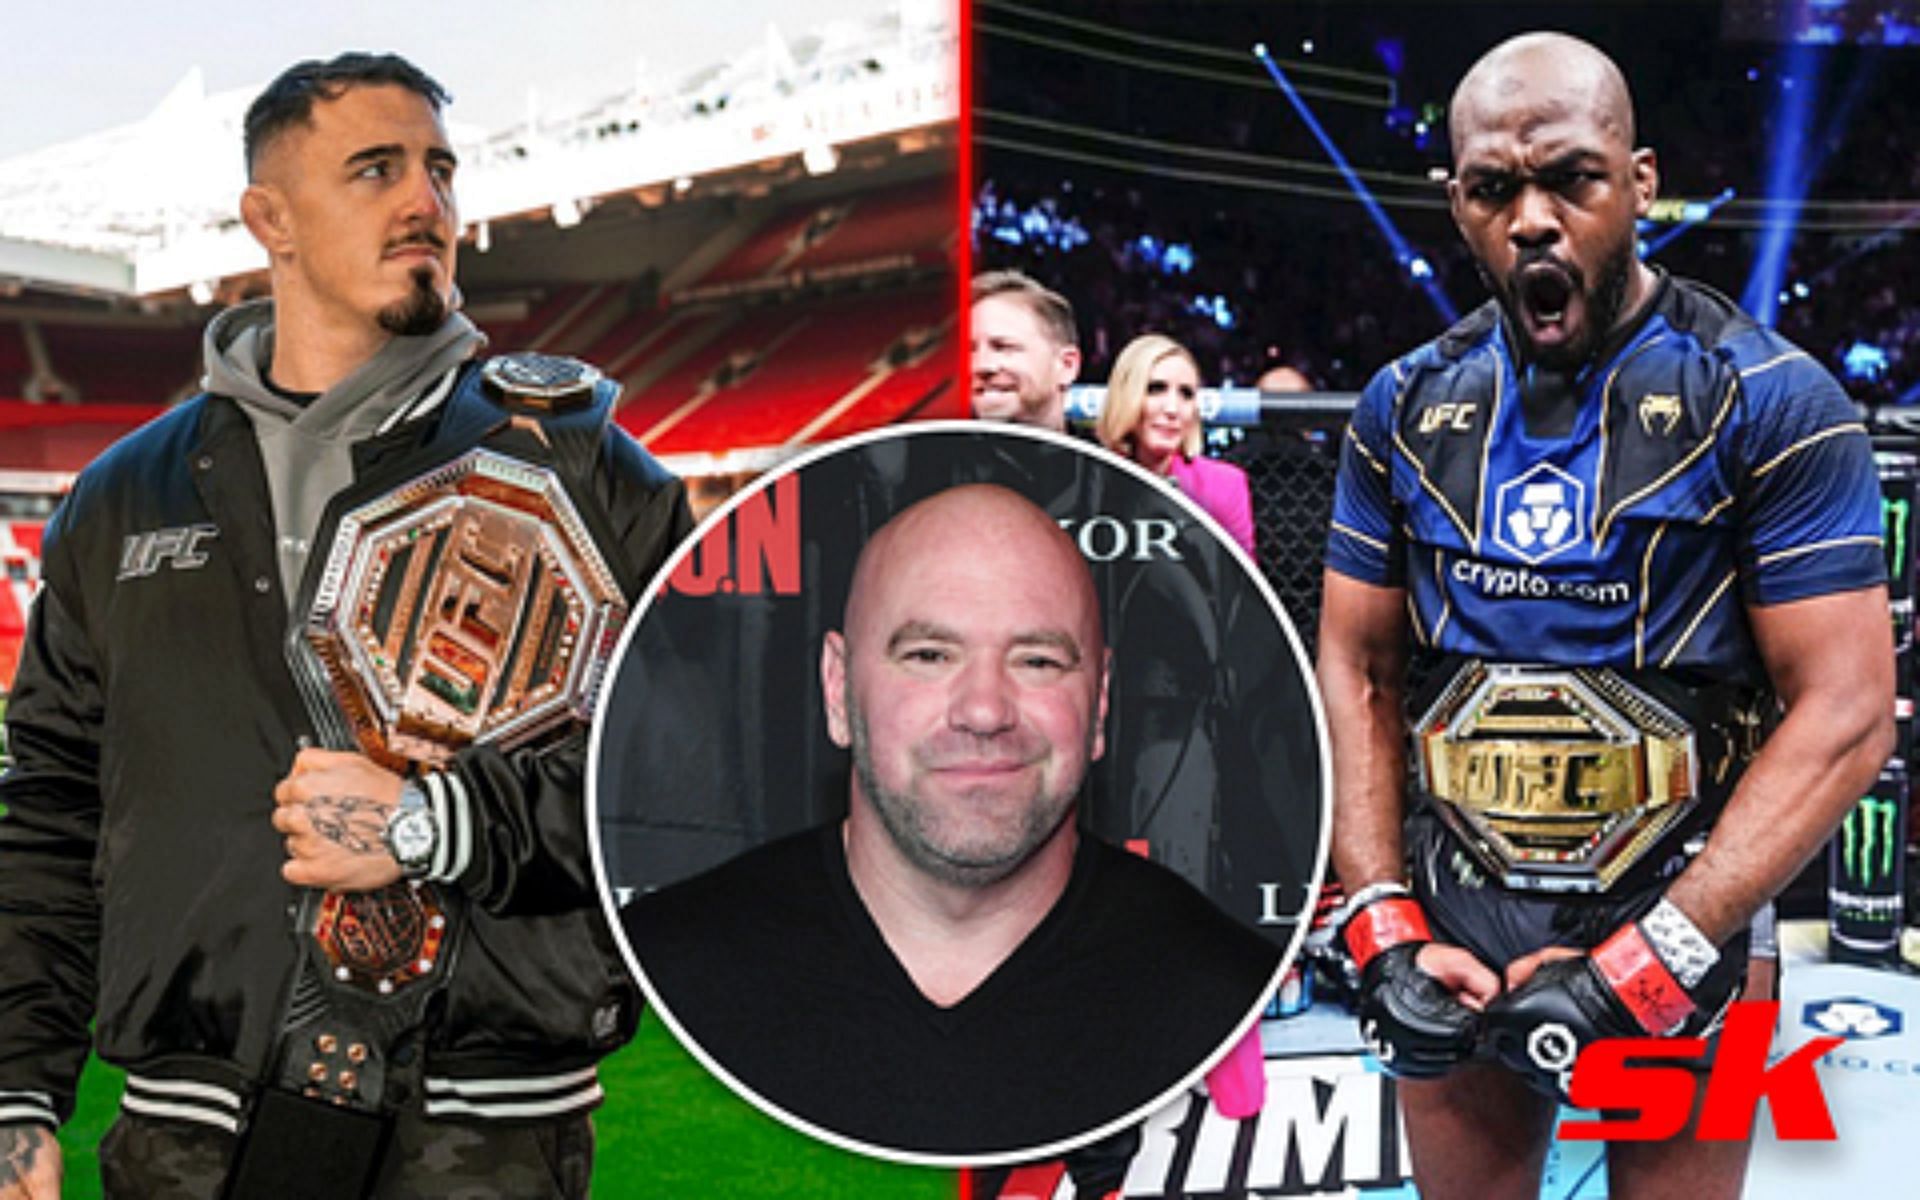 From left to right: Tom Aspinall [image courtesy of @tomaspinallofficial/Instagram], Dana White [image courtesy of Getty Images], Jon Jones [image courtesy of @SmackdownLayer/Twitter]